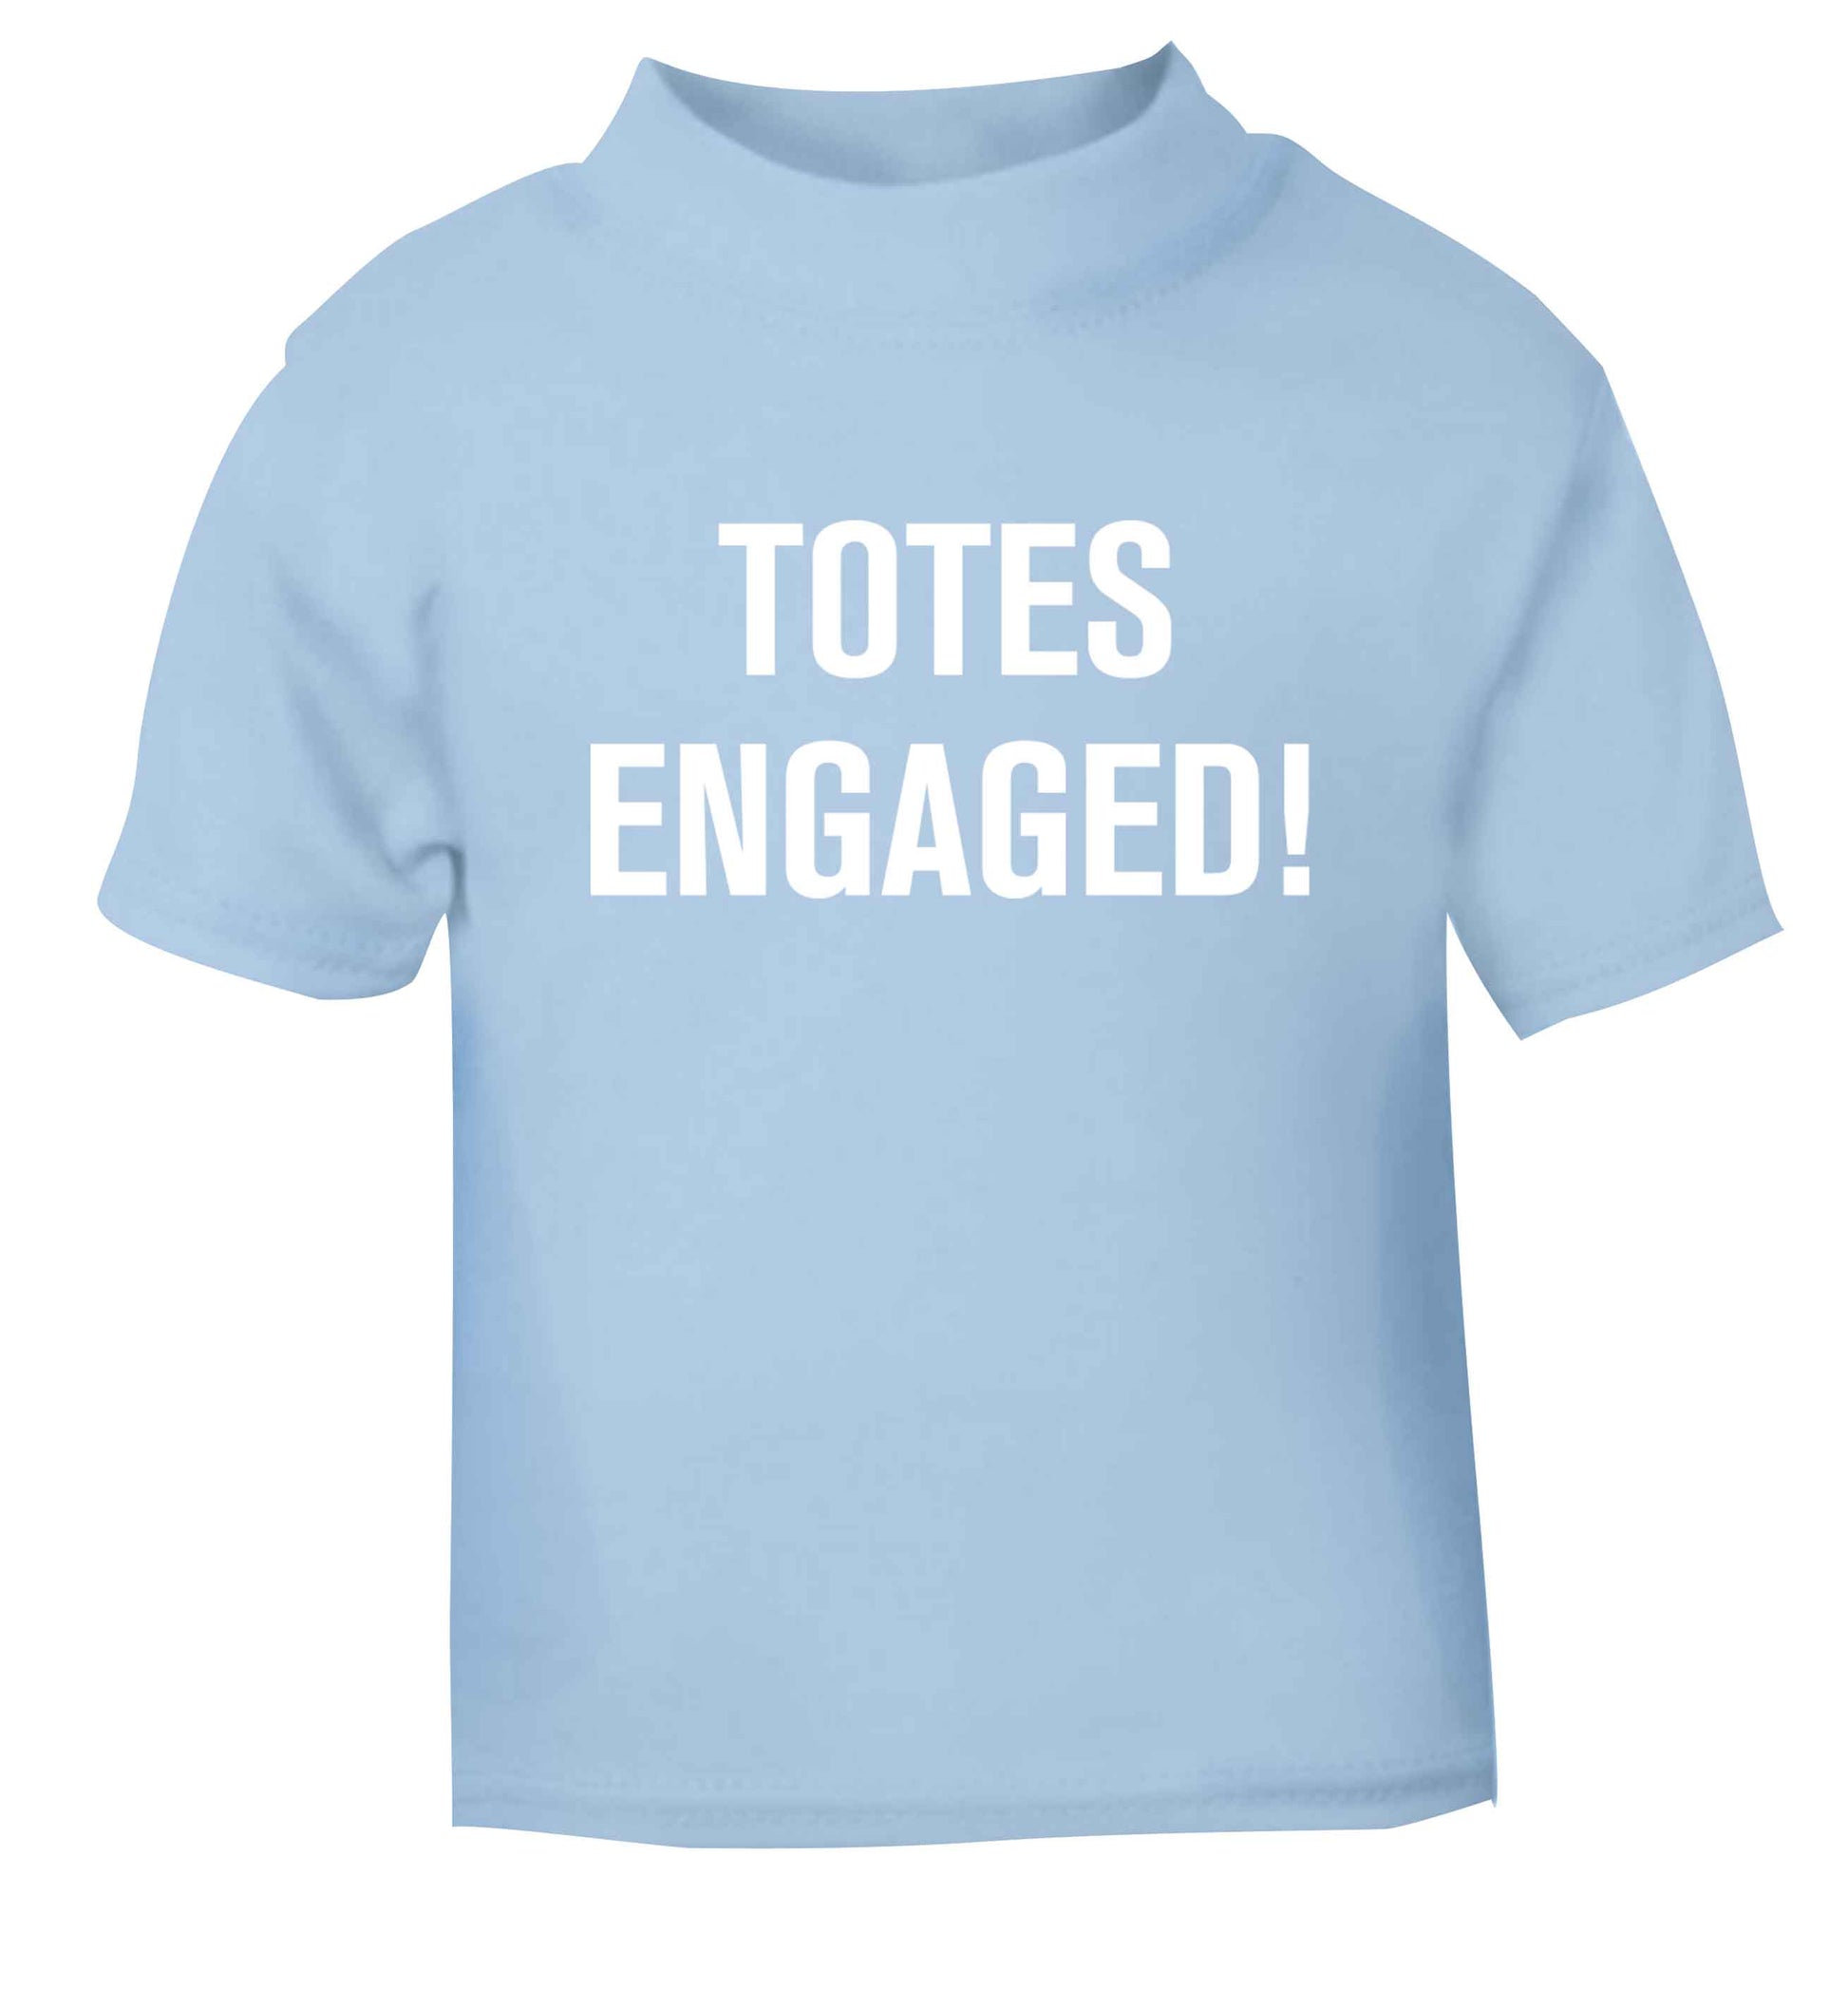 Totes engaged light blue baby toddler Tshirt 2 Years